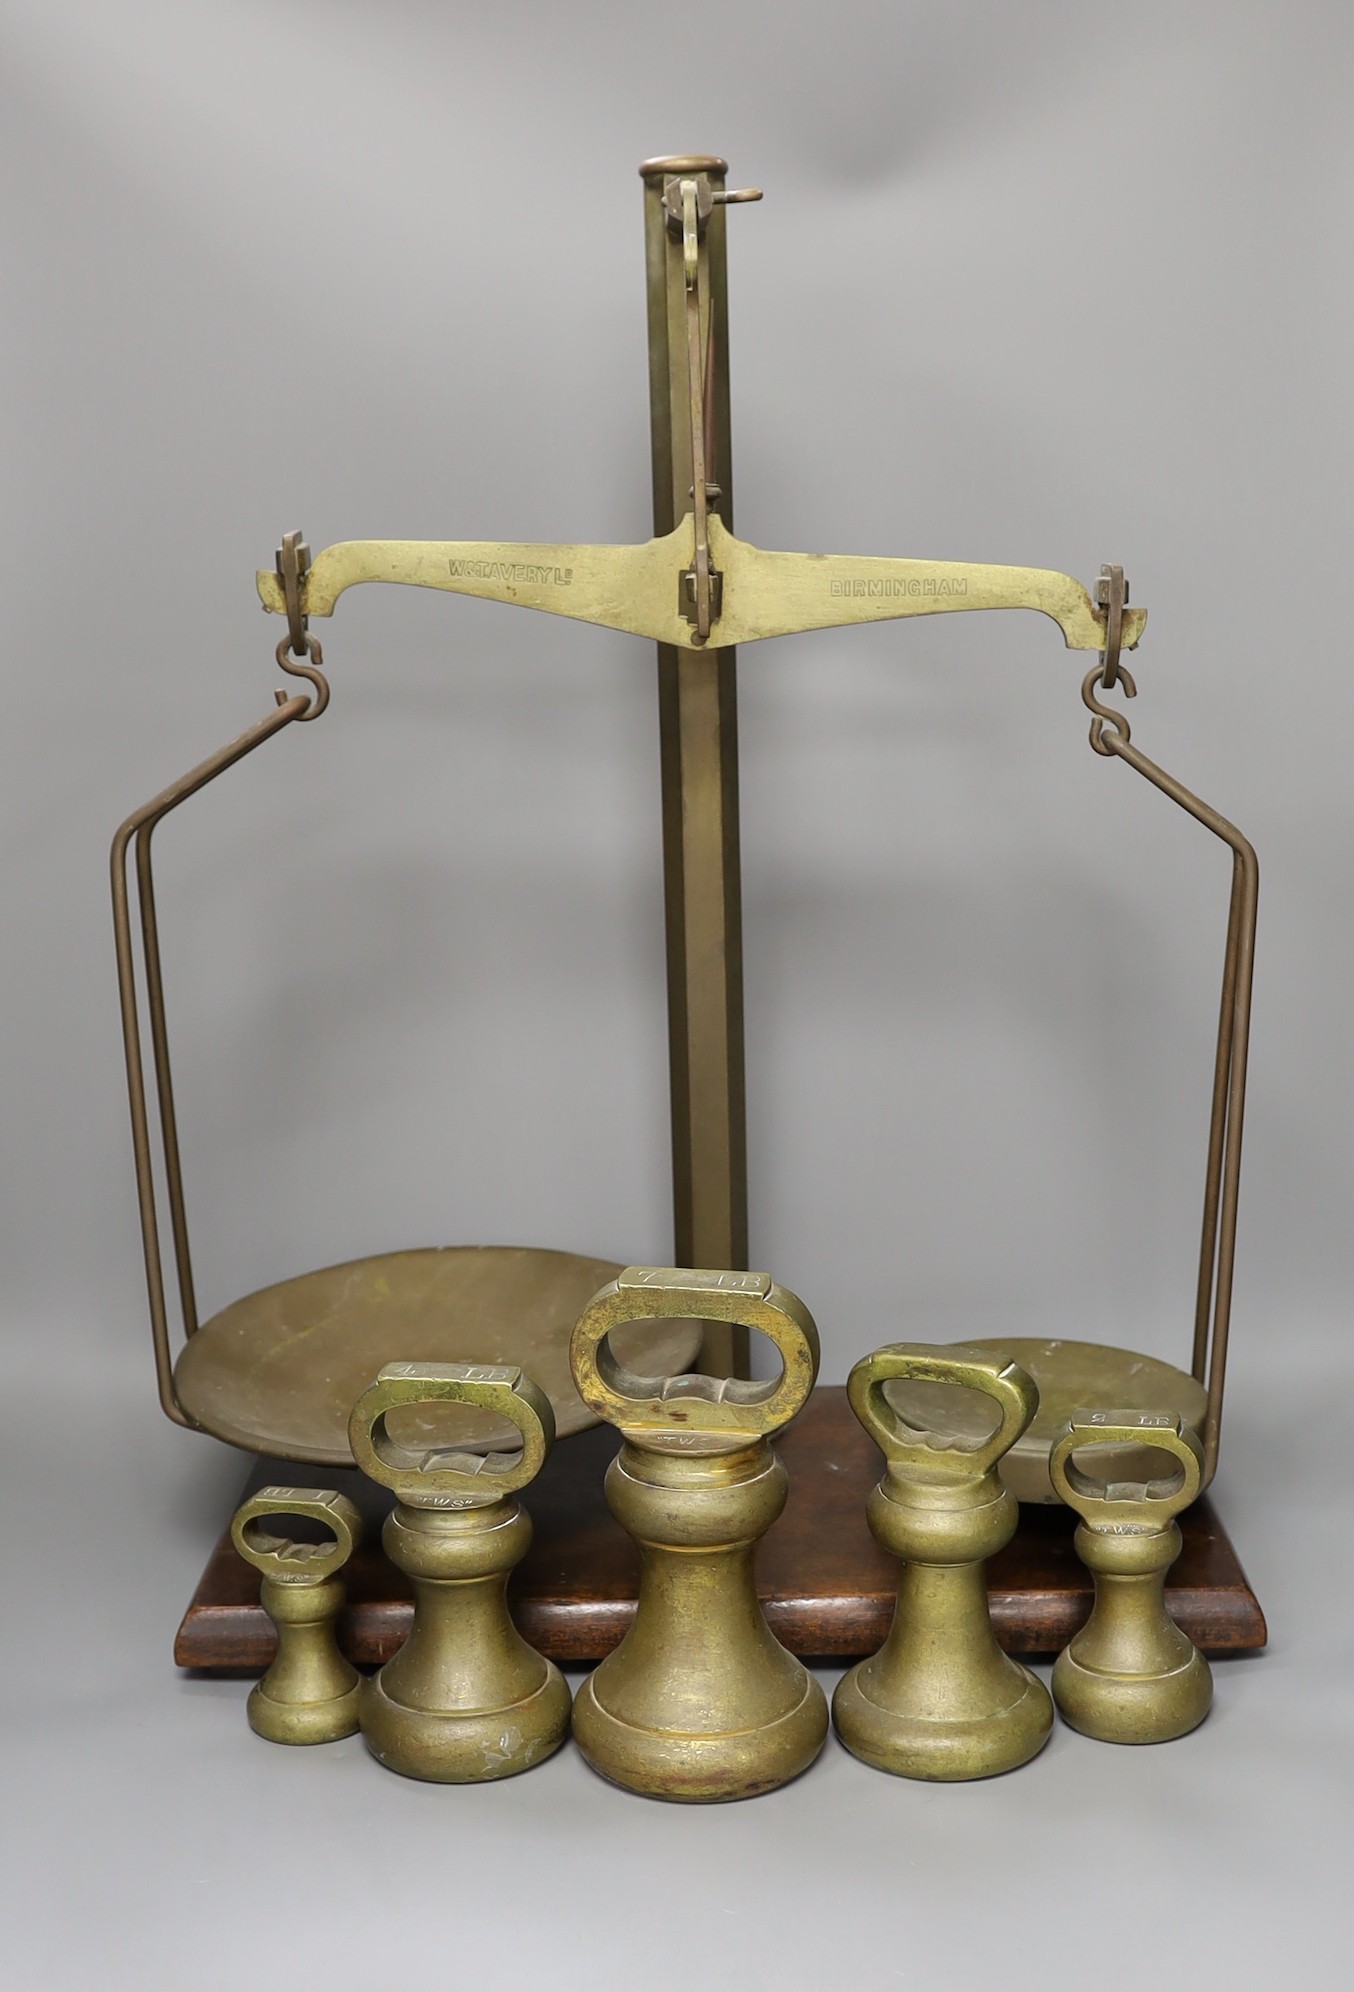 A set of grocer's scales by W&T. Avery Ltd., Birmingham with an 7 LB, two 4 LB, 2 LB and a 1 LB weights